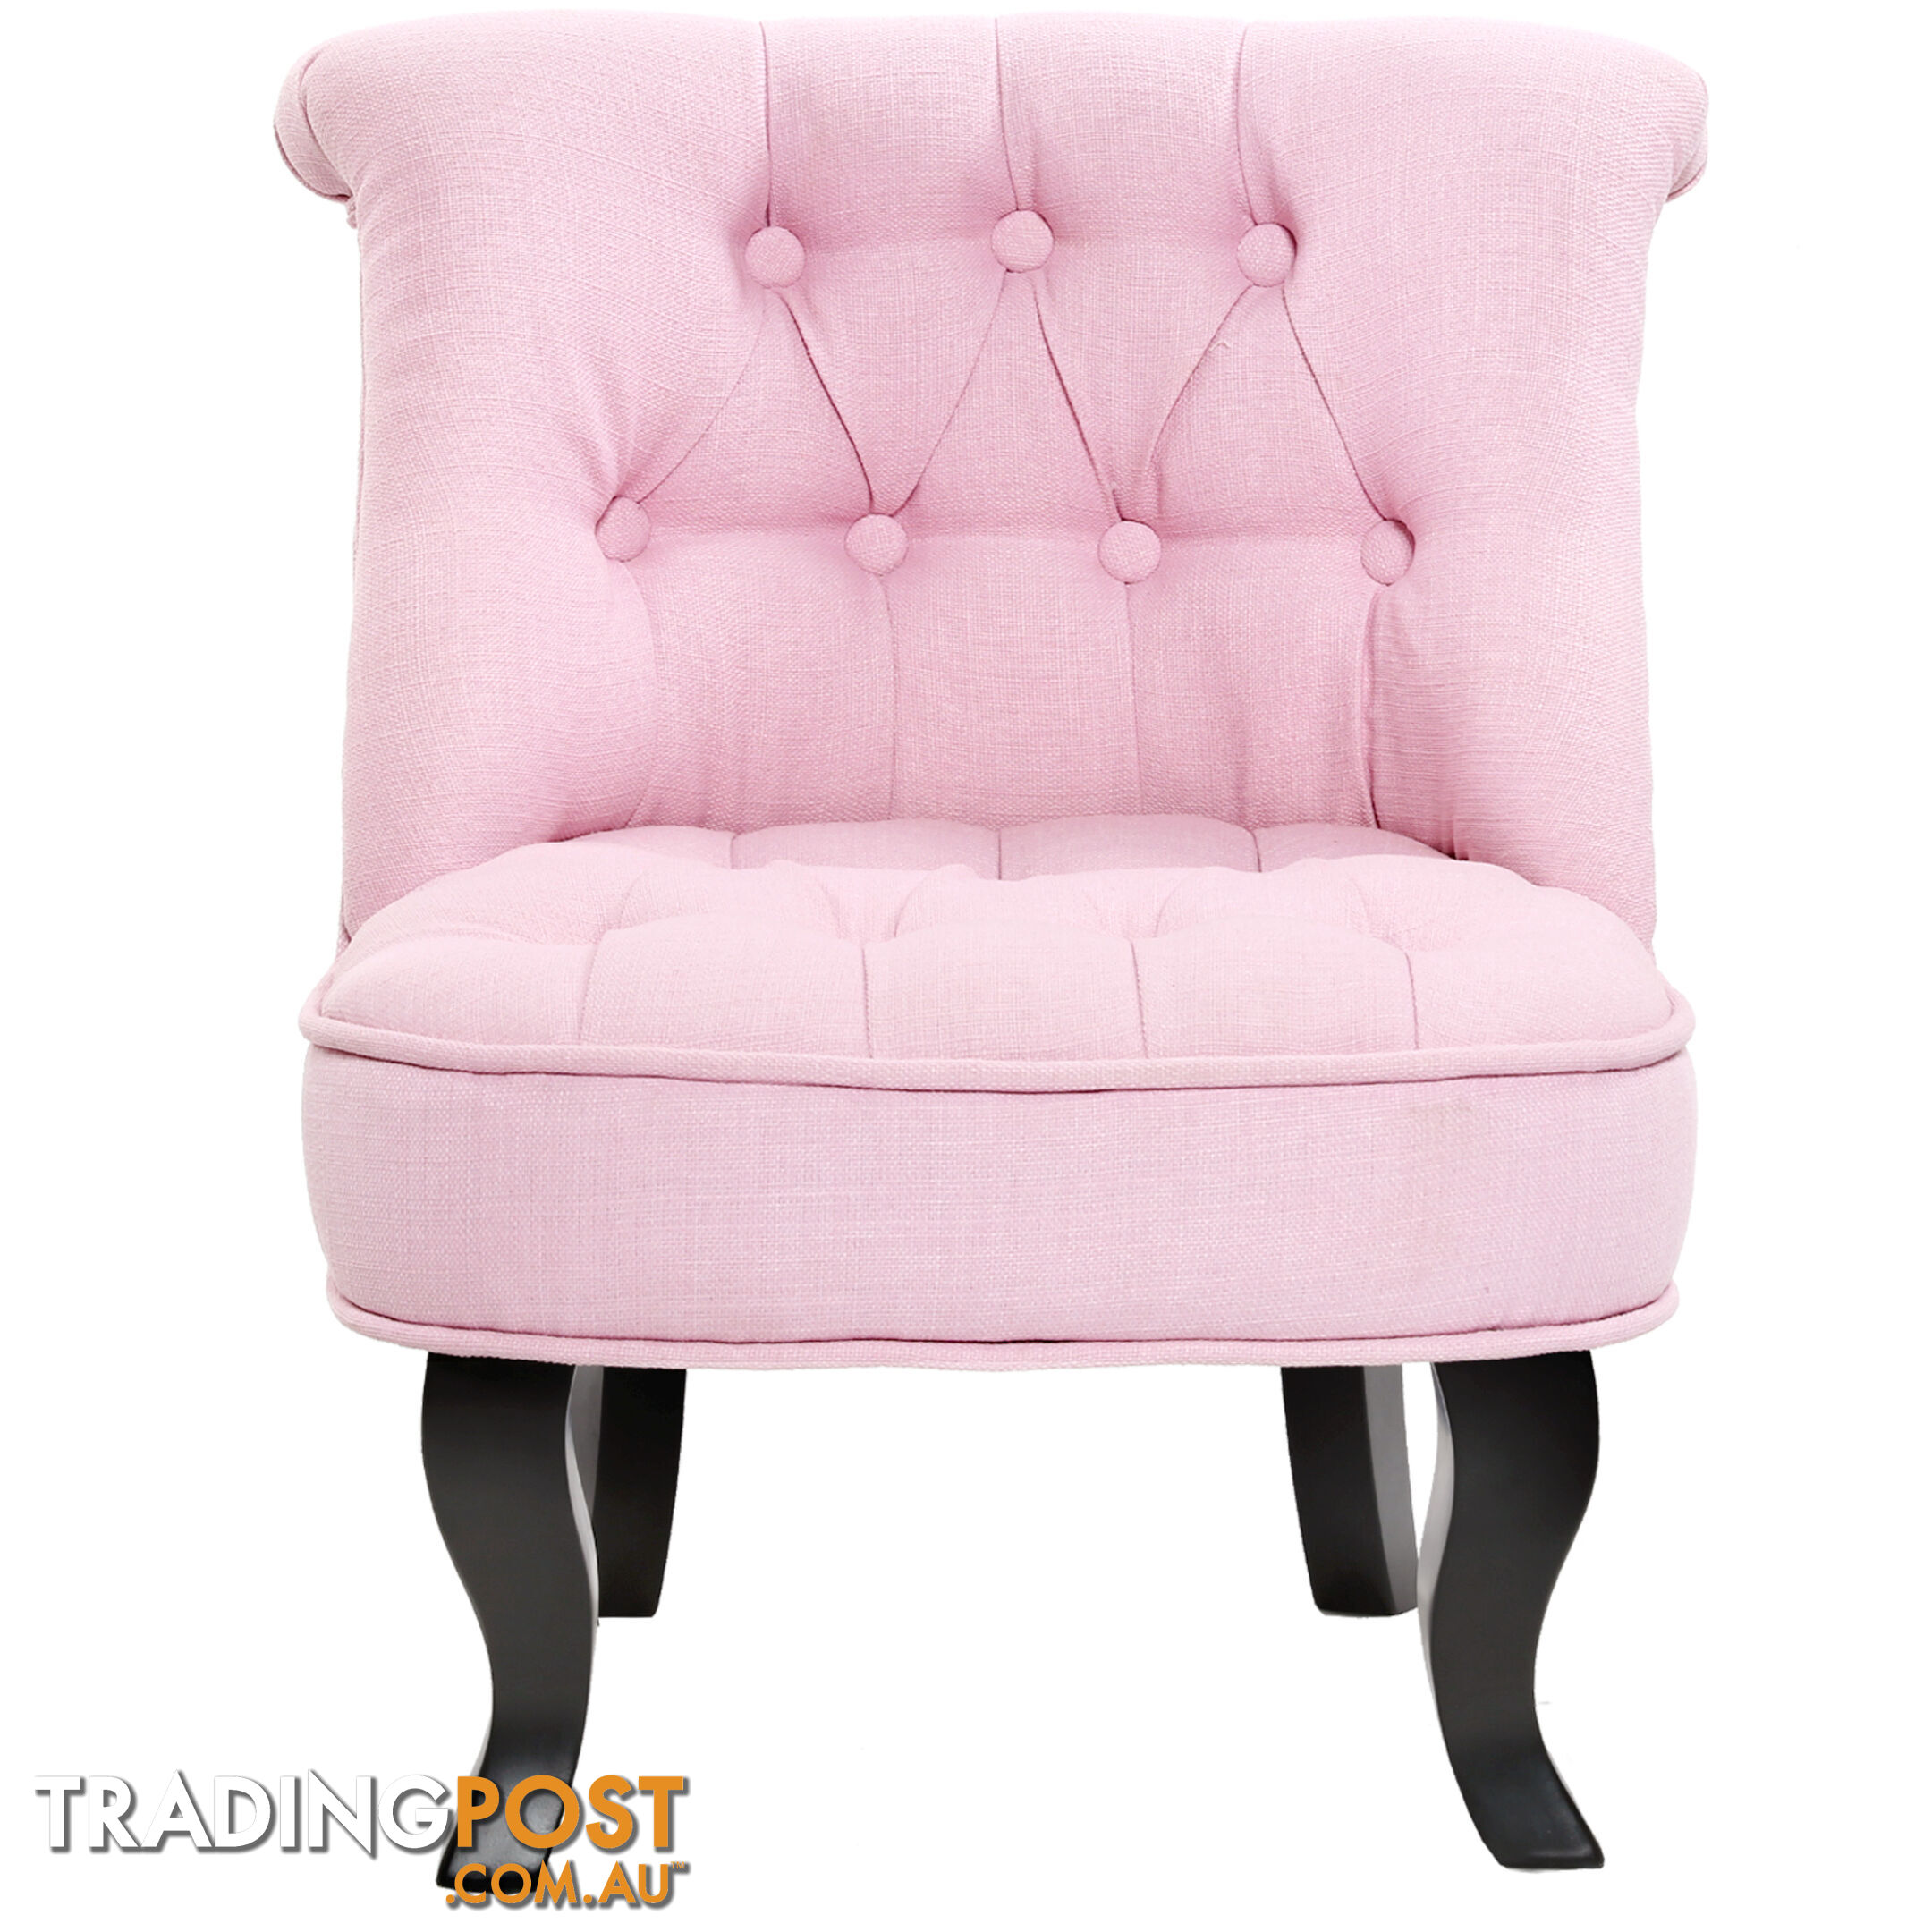 Lorraine Chair French Provincial Kid Fabric Sofa Pastel Pink